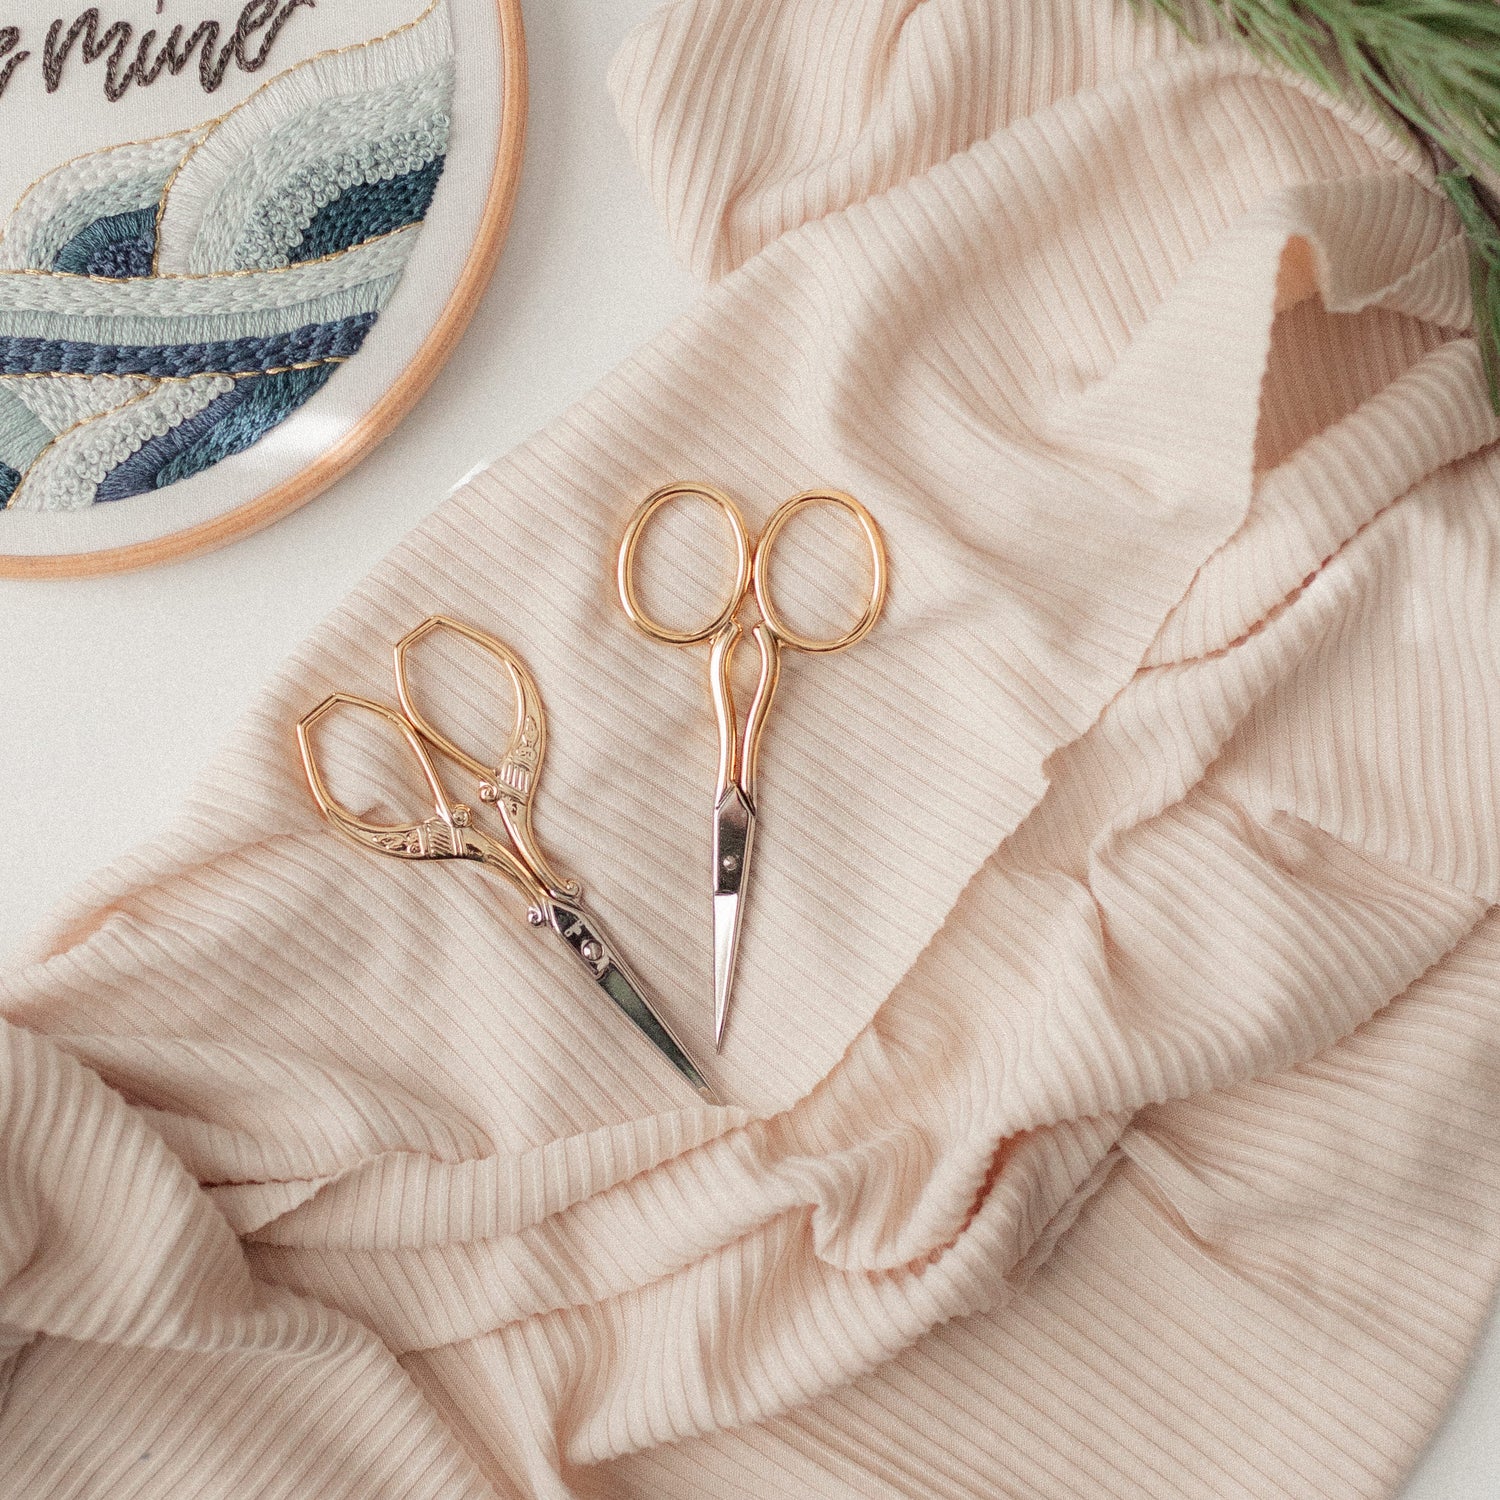 Embroidery Scissors - Abide Embroidery Co.